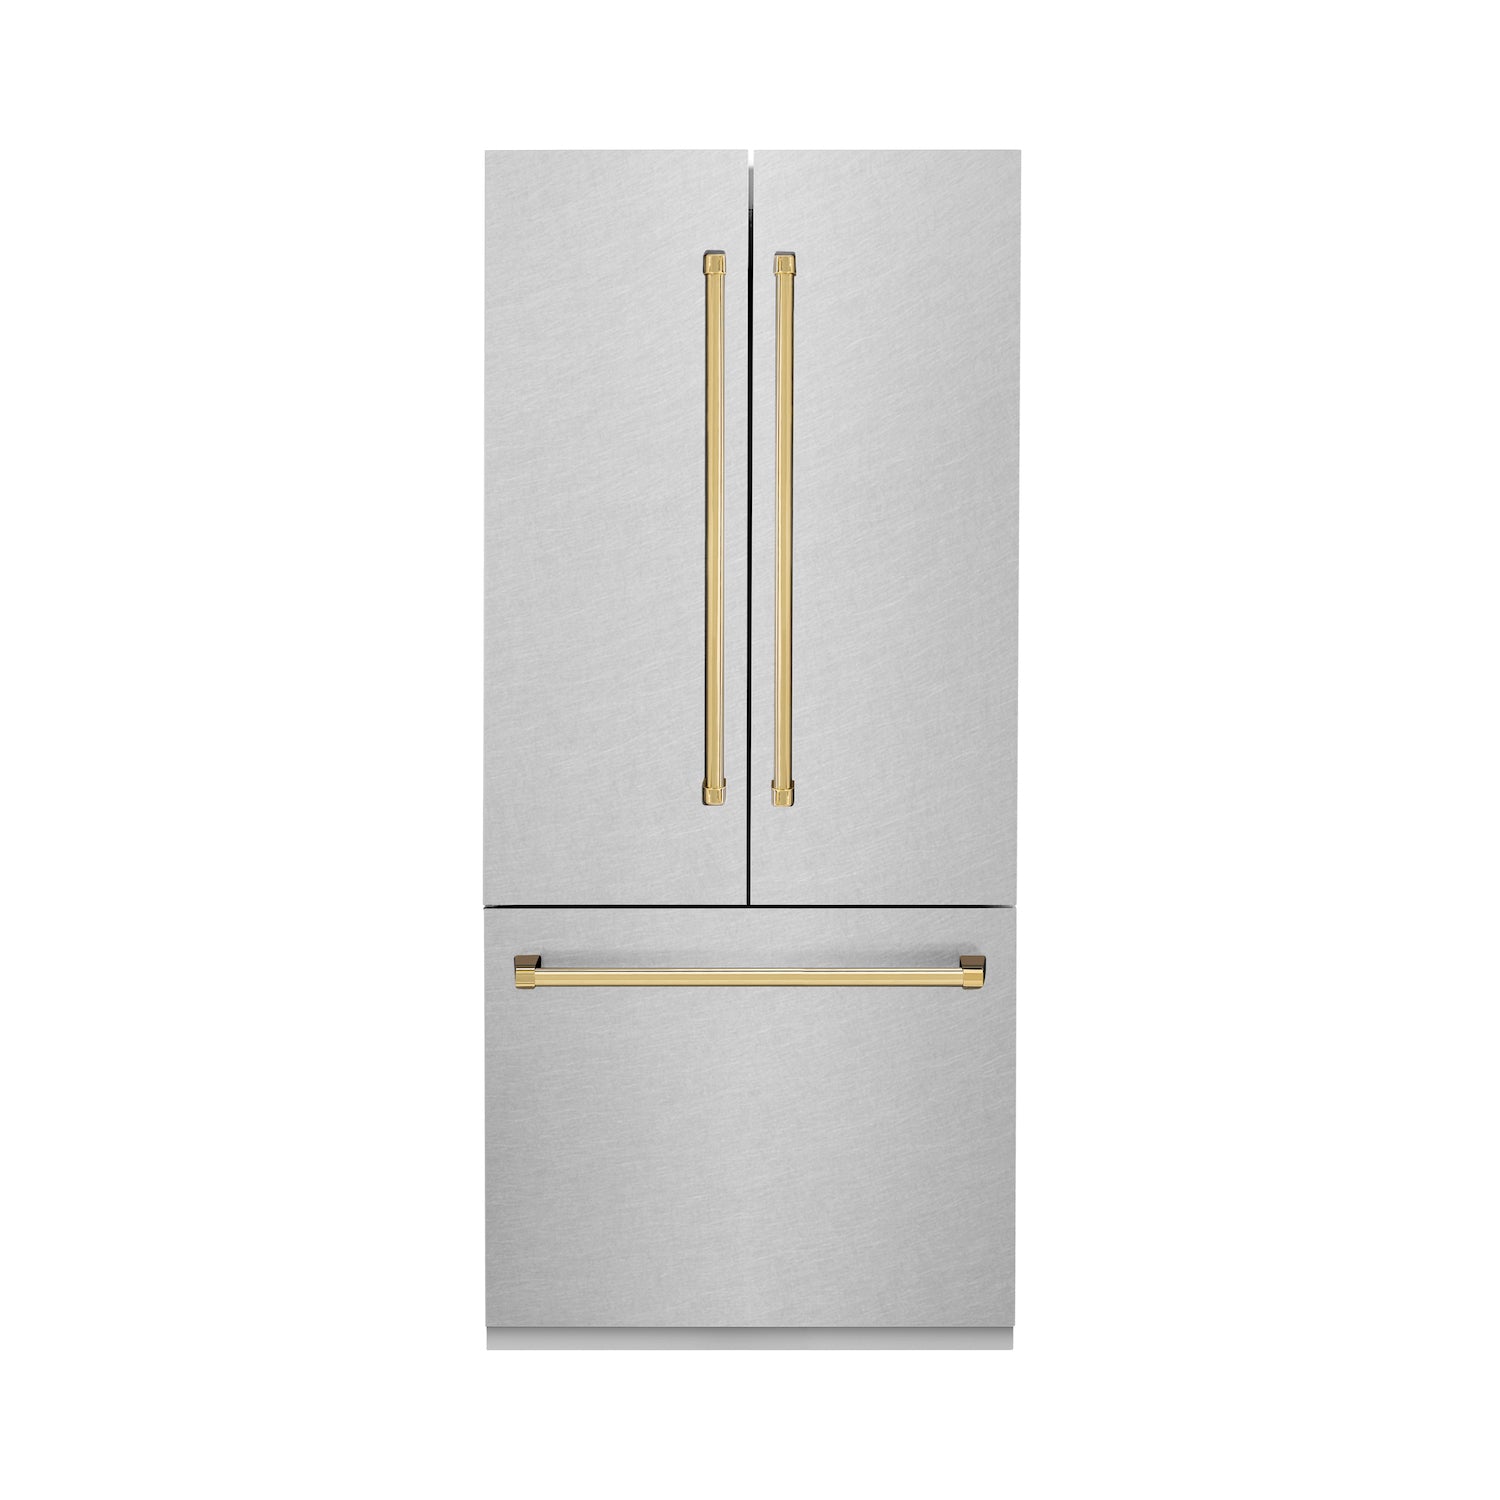 ZLINE Autograph Edition 36 in. 19.6 cu. ft. Built-in 2-Door Bottom Freezer Refrigerator with Internal Water and Ice Dispenser in Fingerprint Resistant Stainless Steel with Polished Gold Accents (RBIVZ-SN-36-G) 